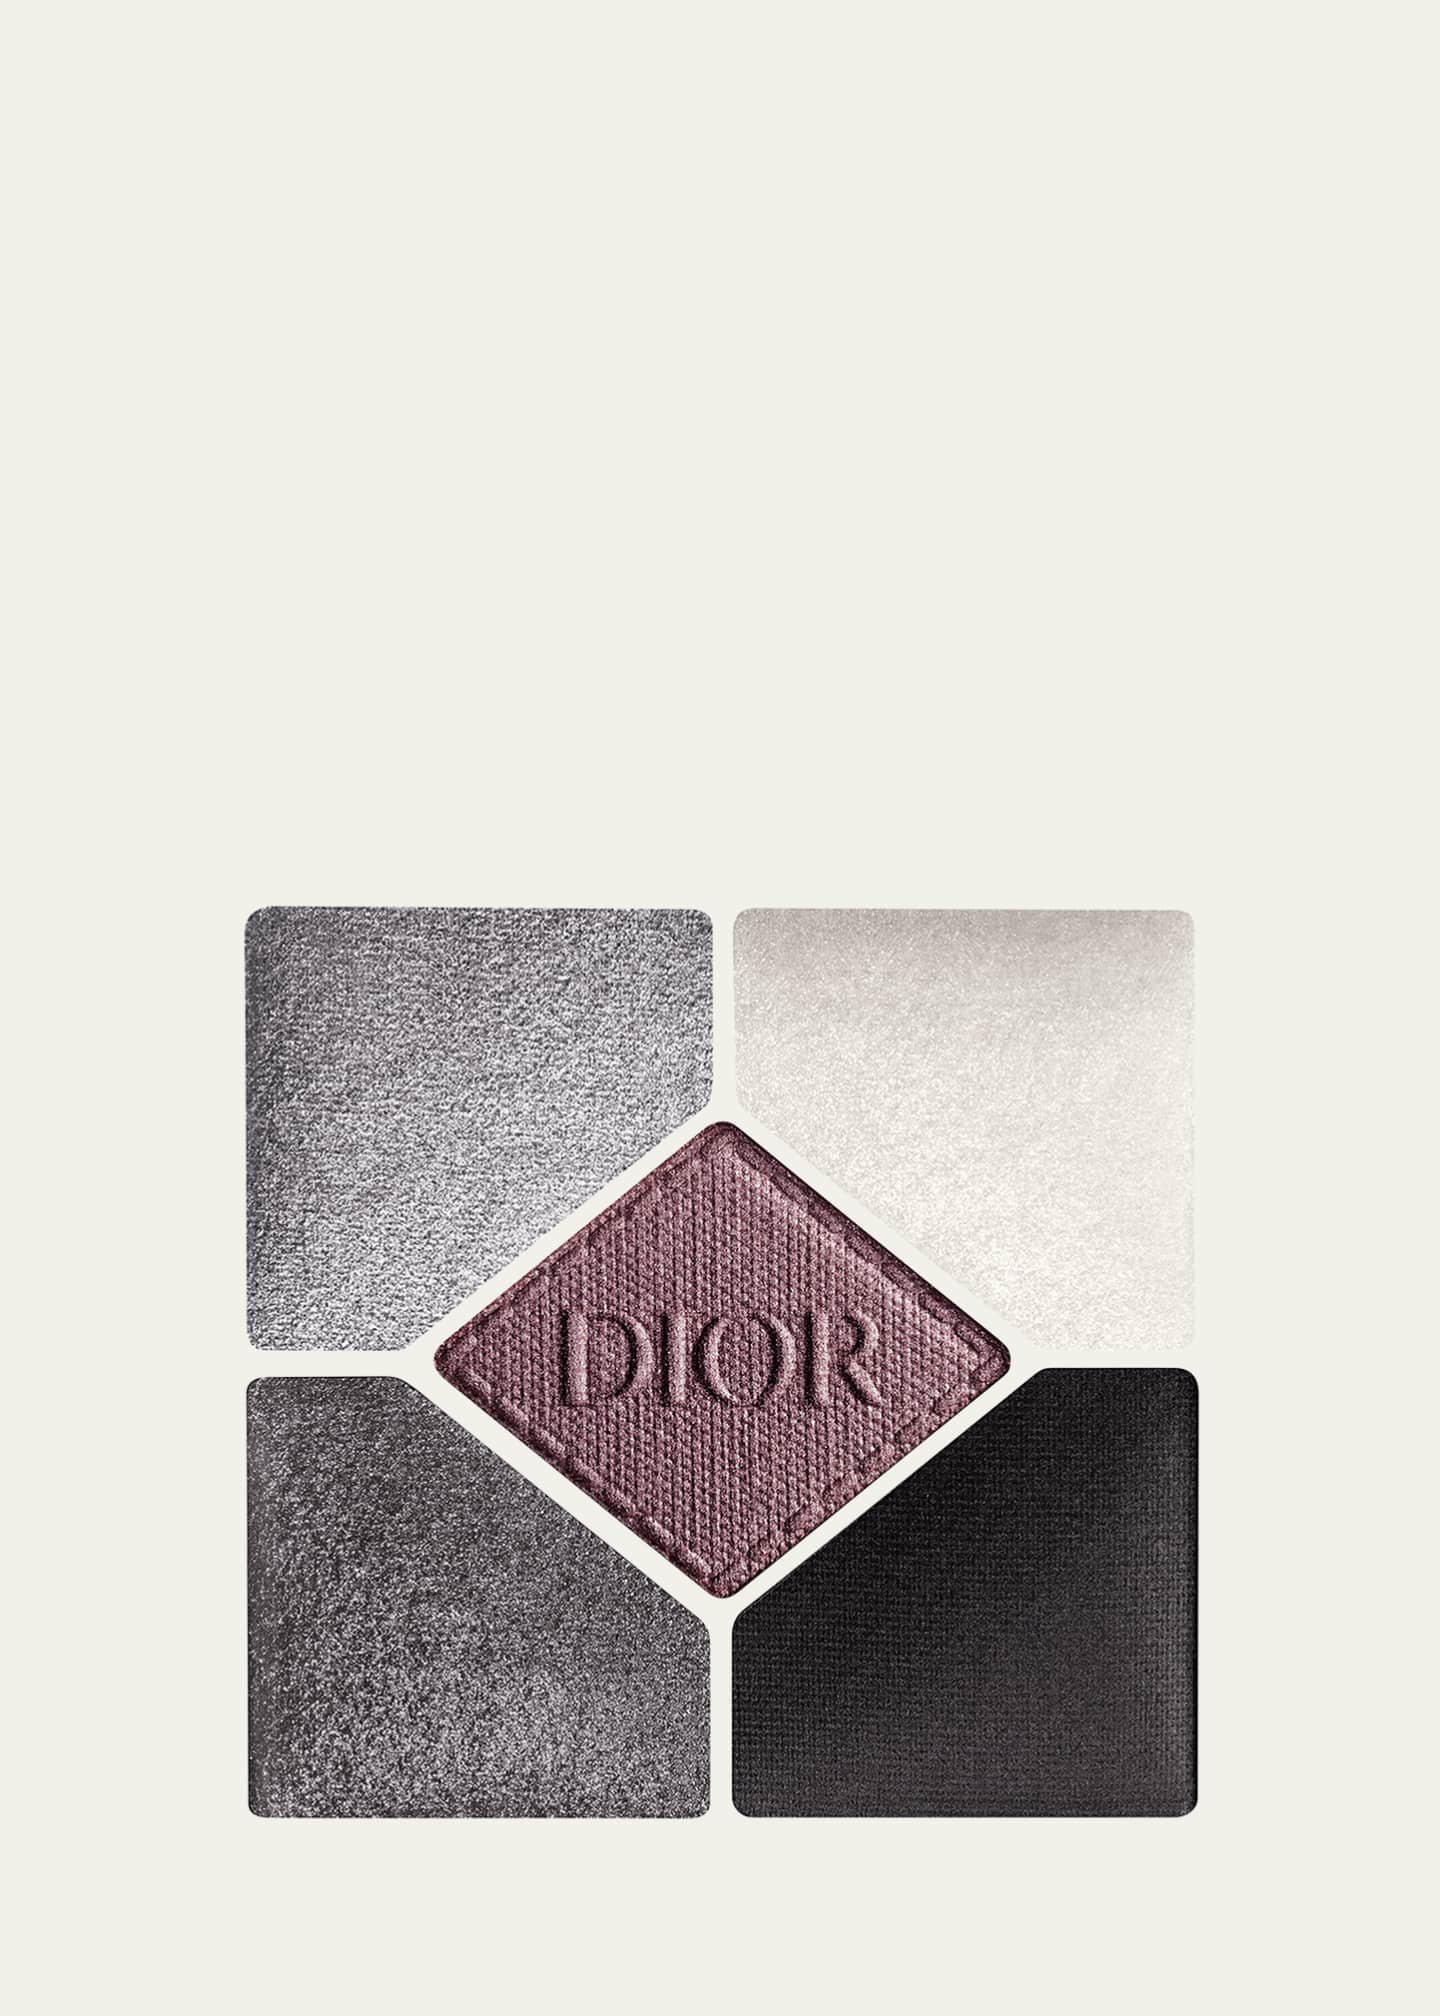 Dior Diorshow 5 Couleurs Couture Eyeshadow Palette - Bergdorf Goodman